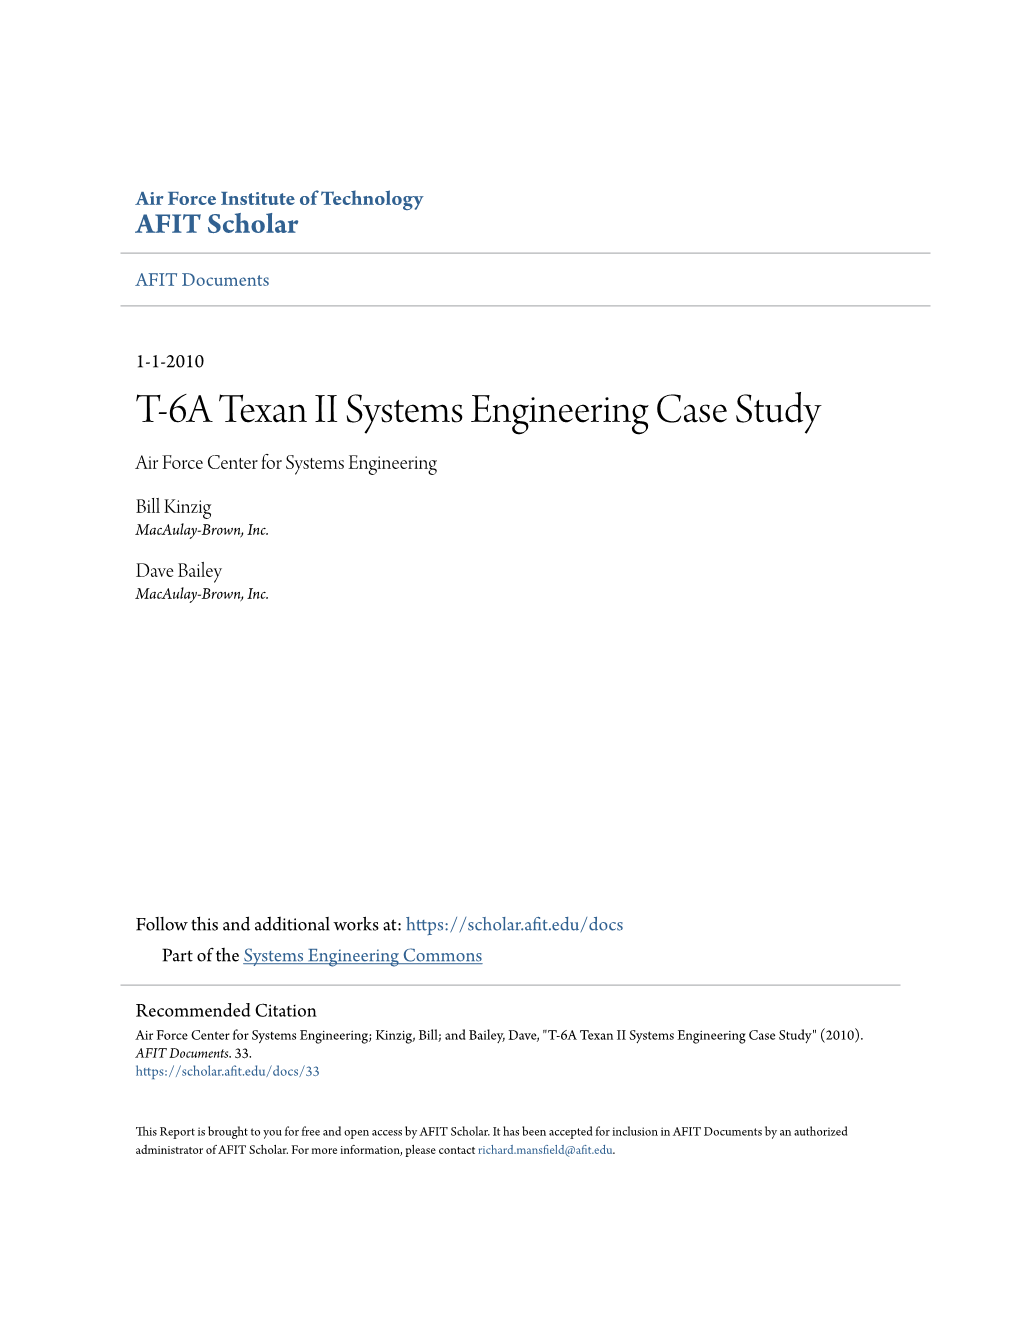 T-6A Texan II Systems Engineering Case Study Air Force Center for Systems Engineering